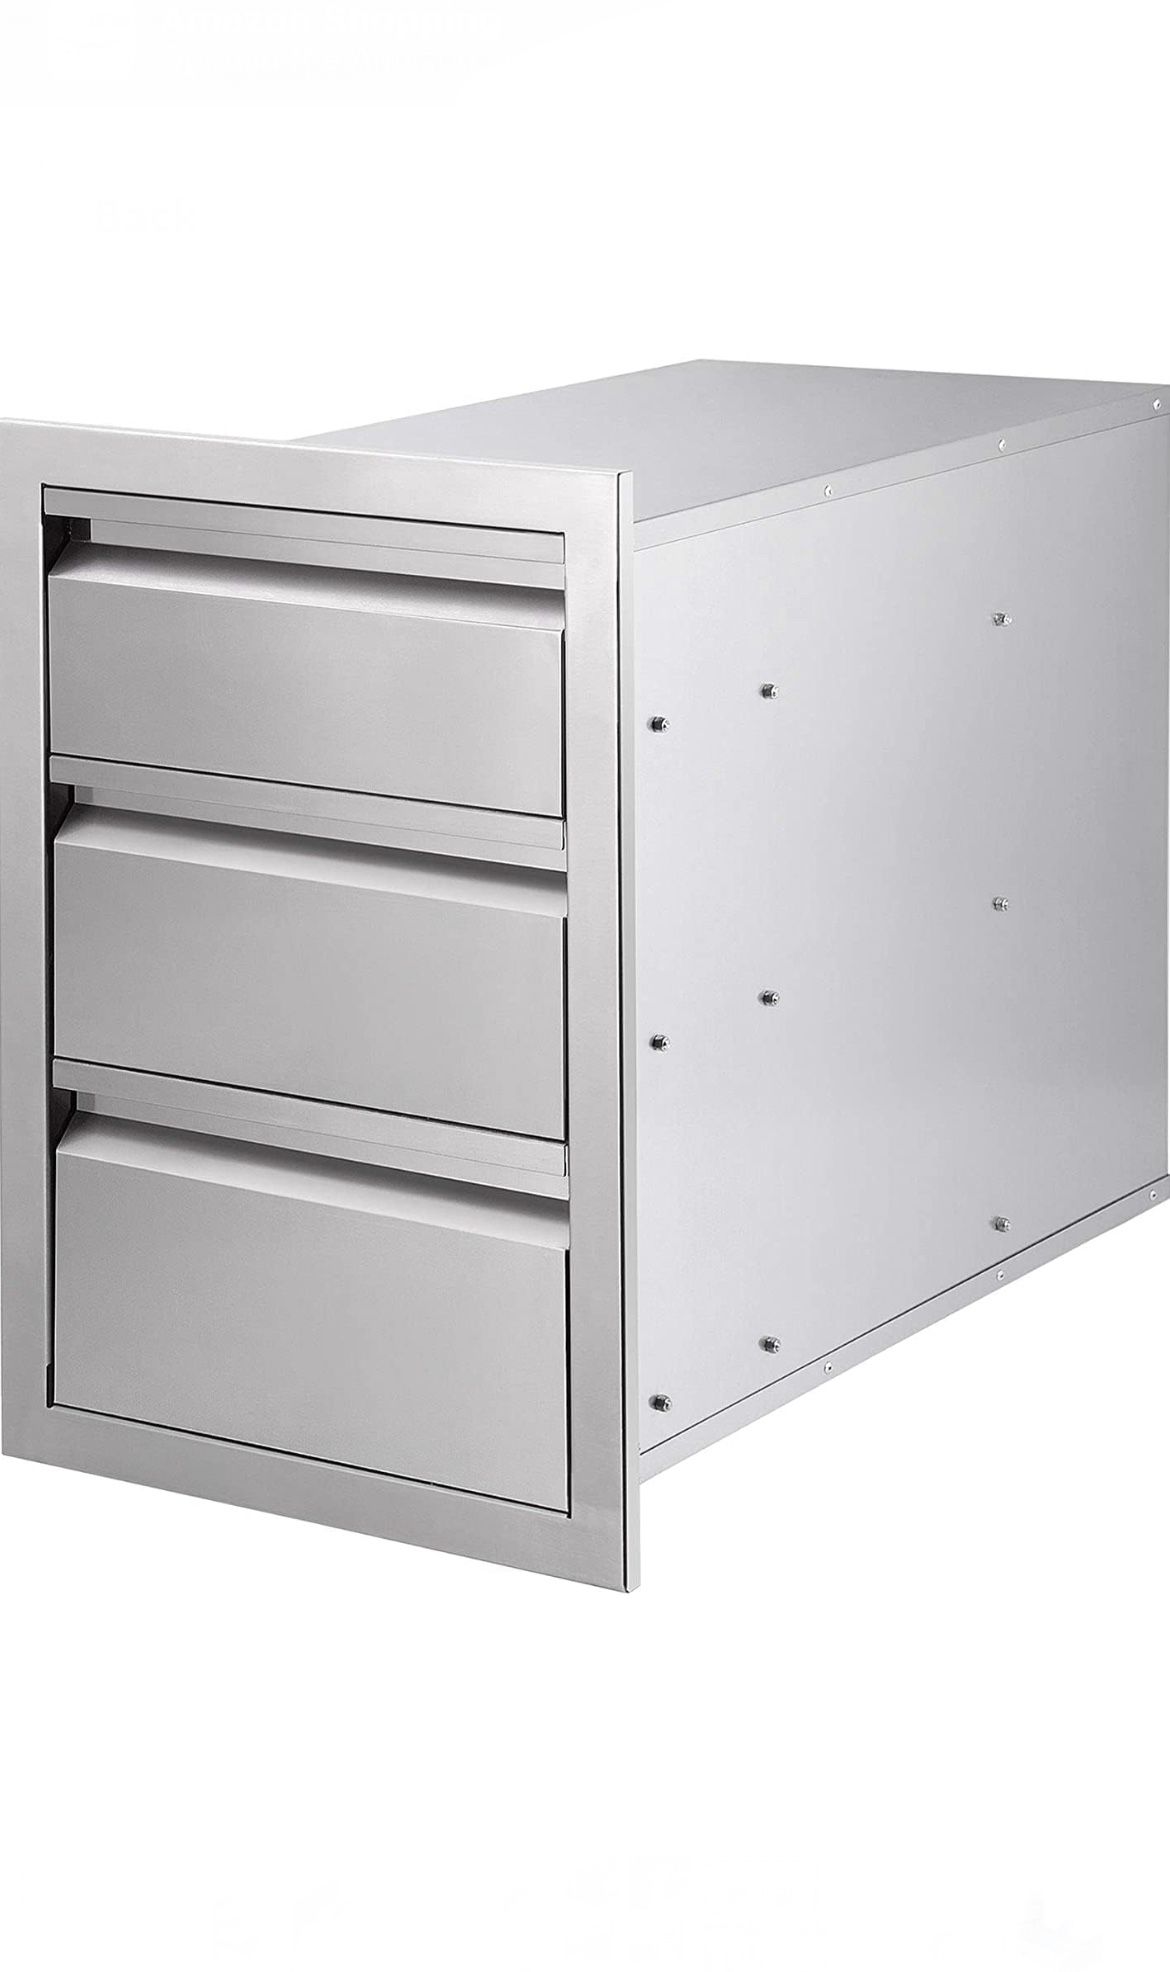 Outdoor Kitchen Drawers 15" W x 21" H x 22.5" D, Stainless Steel Flush Mount Access BBQ Drawers